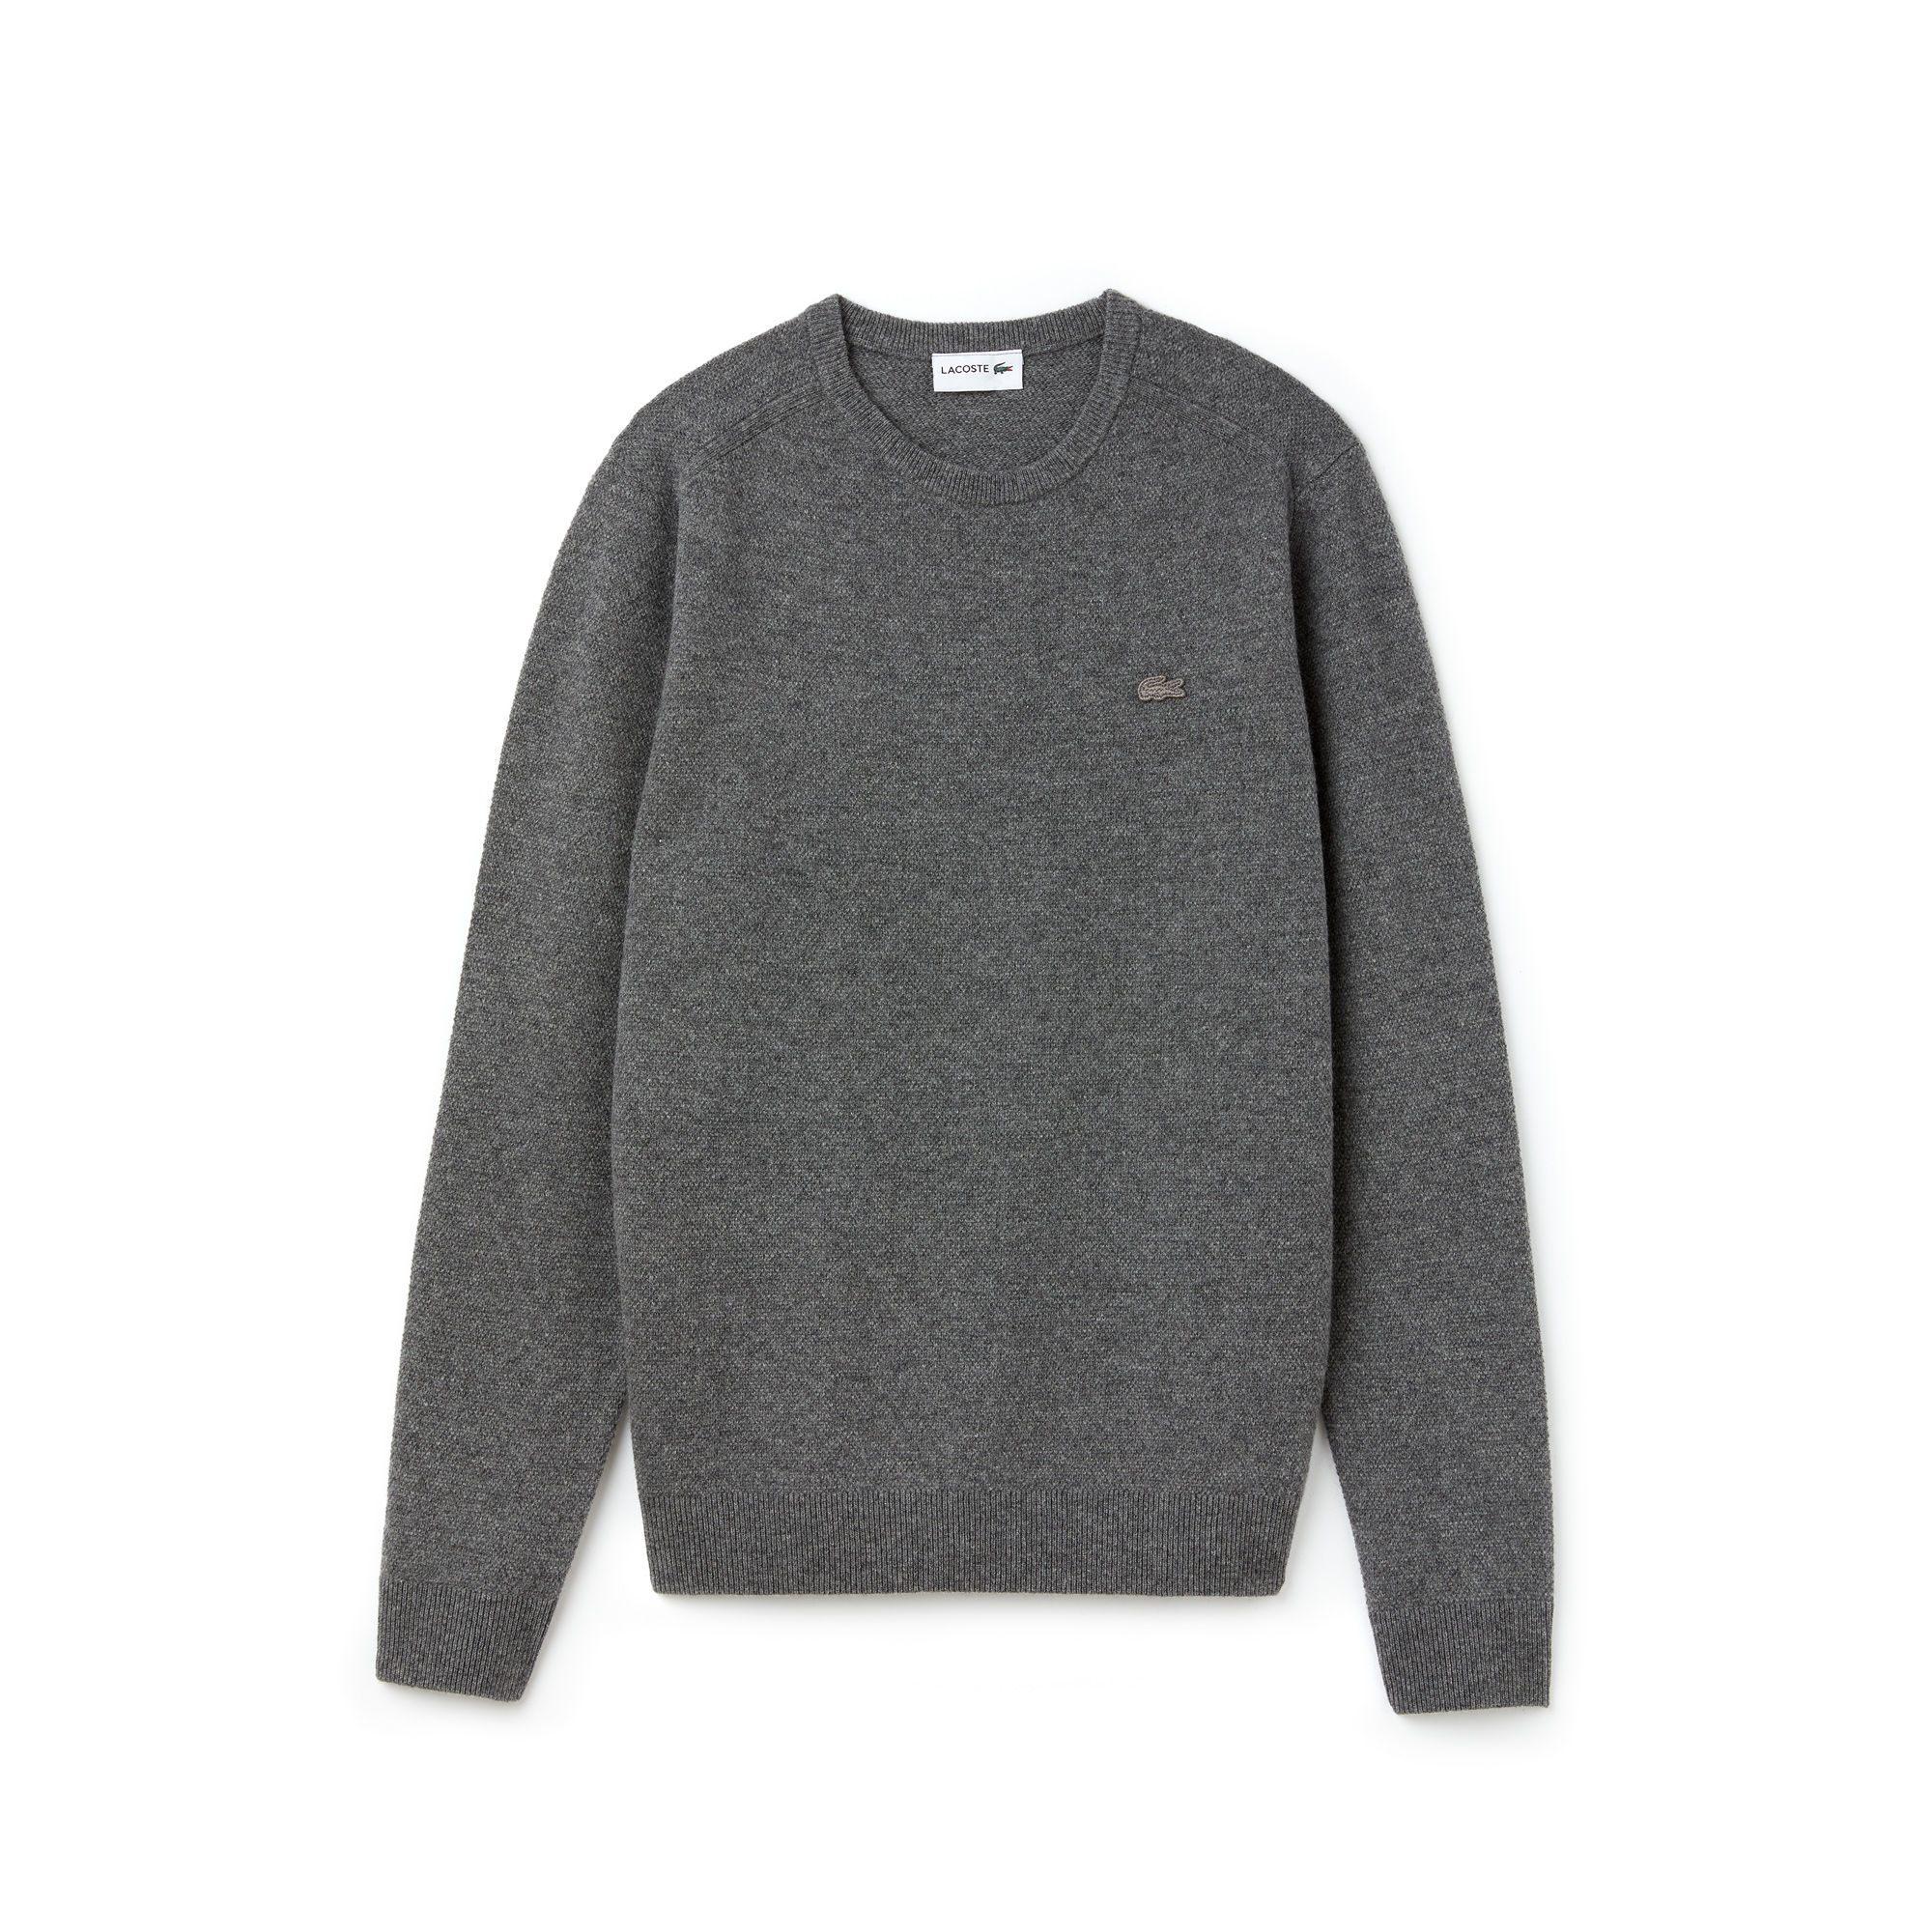 Lacoste Cashmere Sweater Mens Online, 59% OFF | www.velocityusa.com